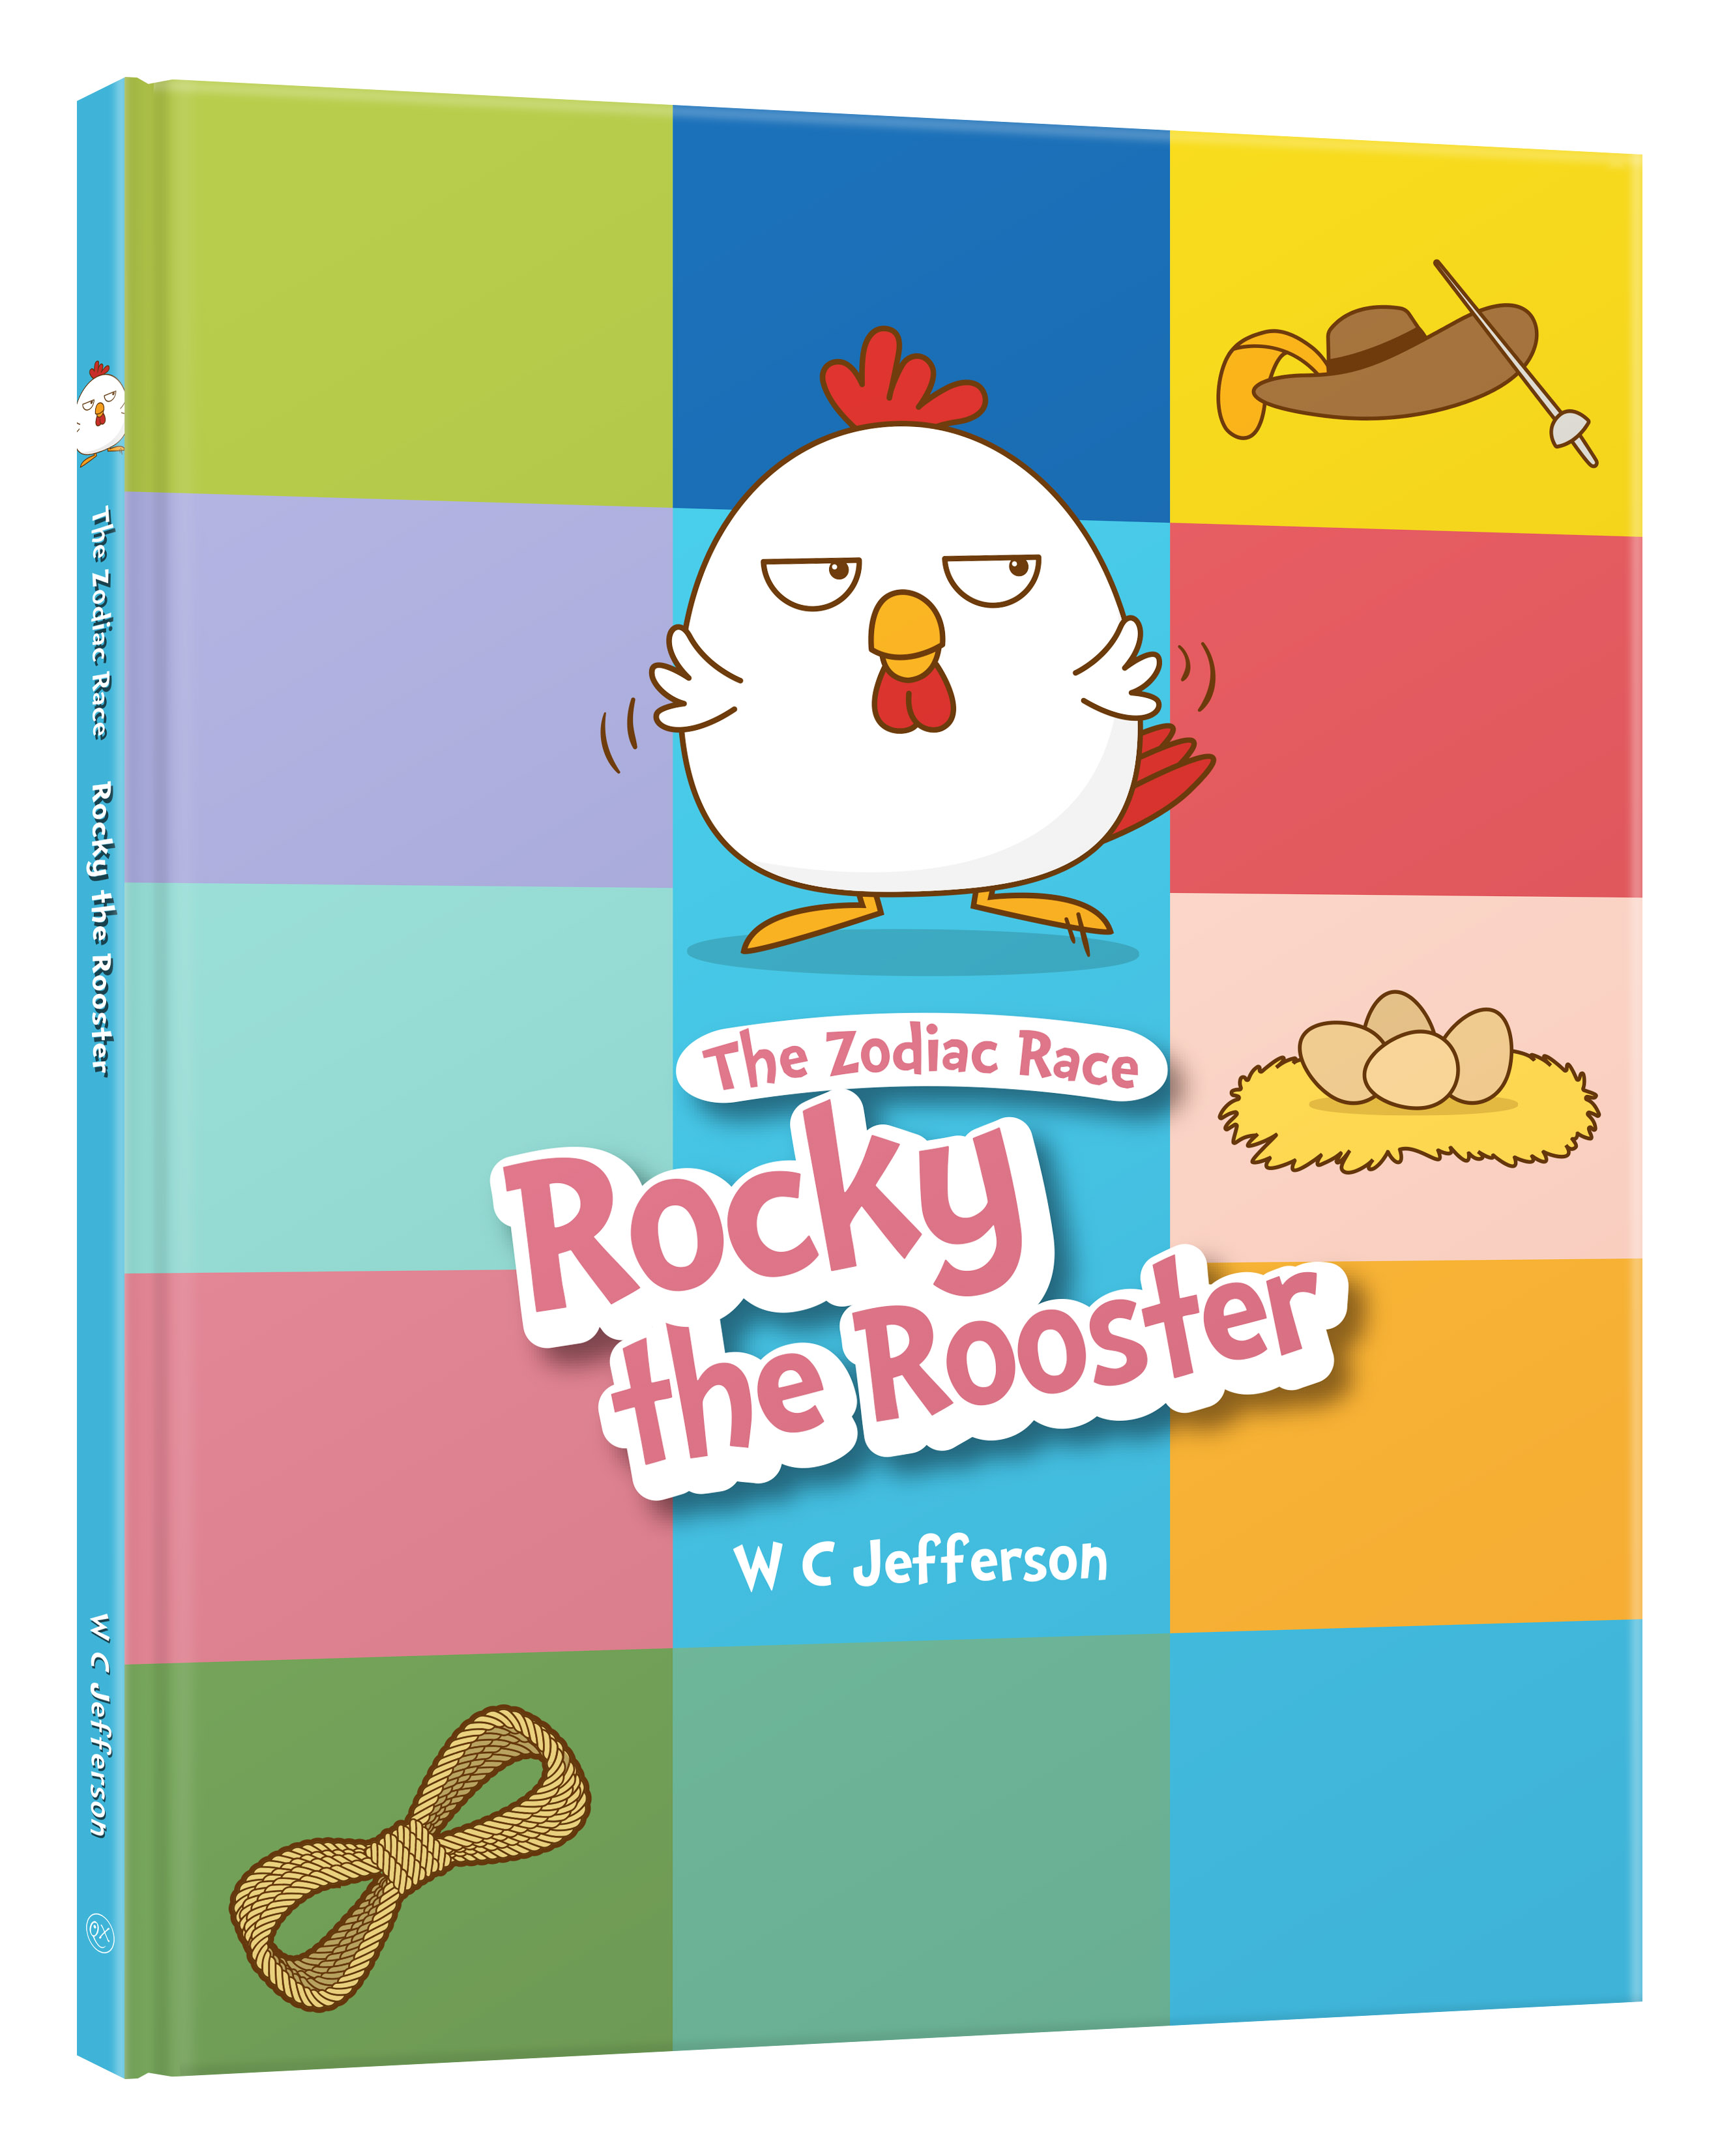 The Zodiac Race: Rocky the Rooster